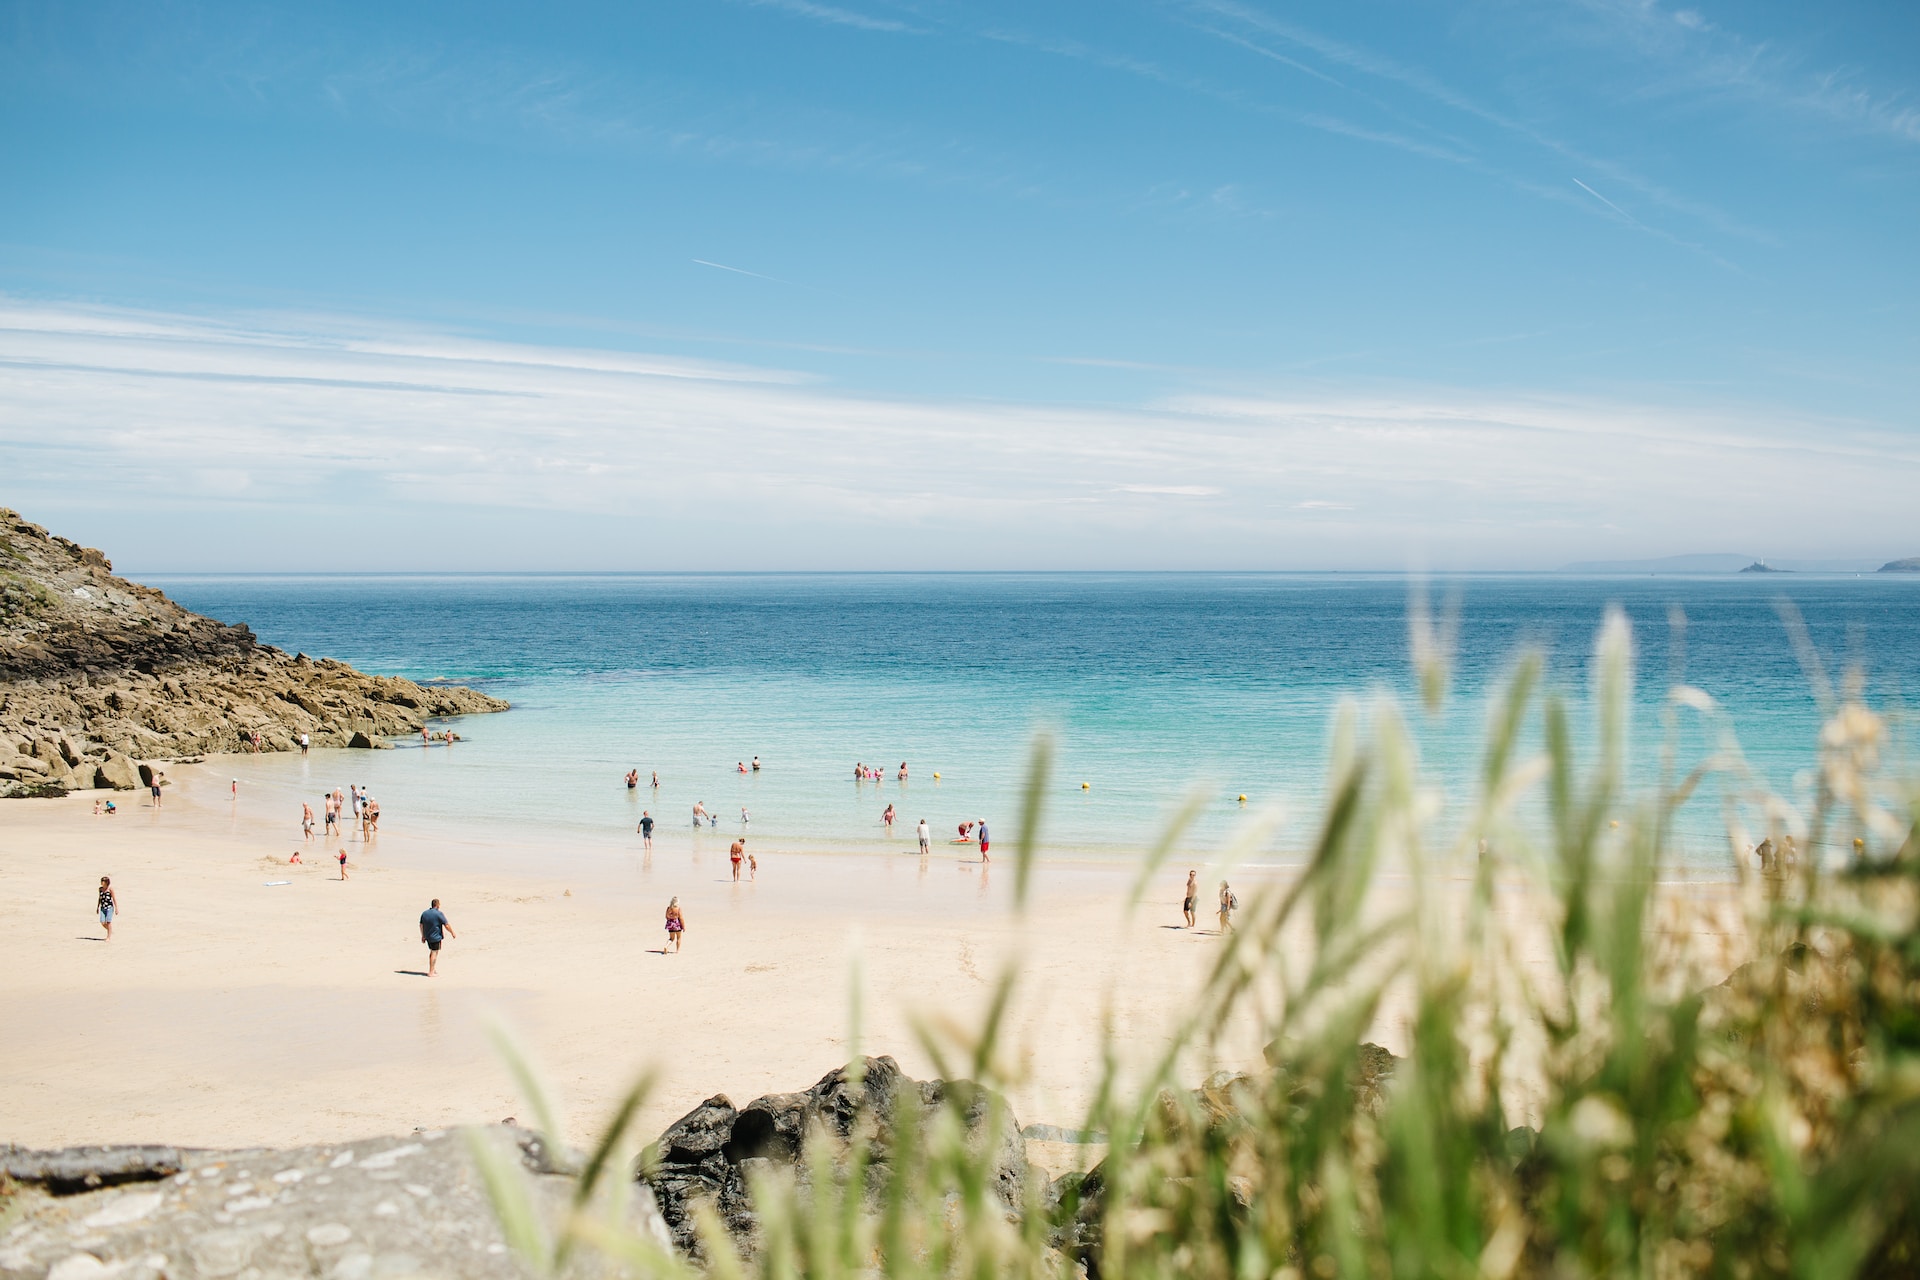 View of the water front at St Ives Beach, Cornwall.